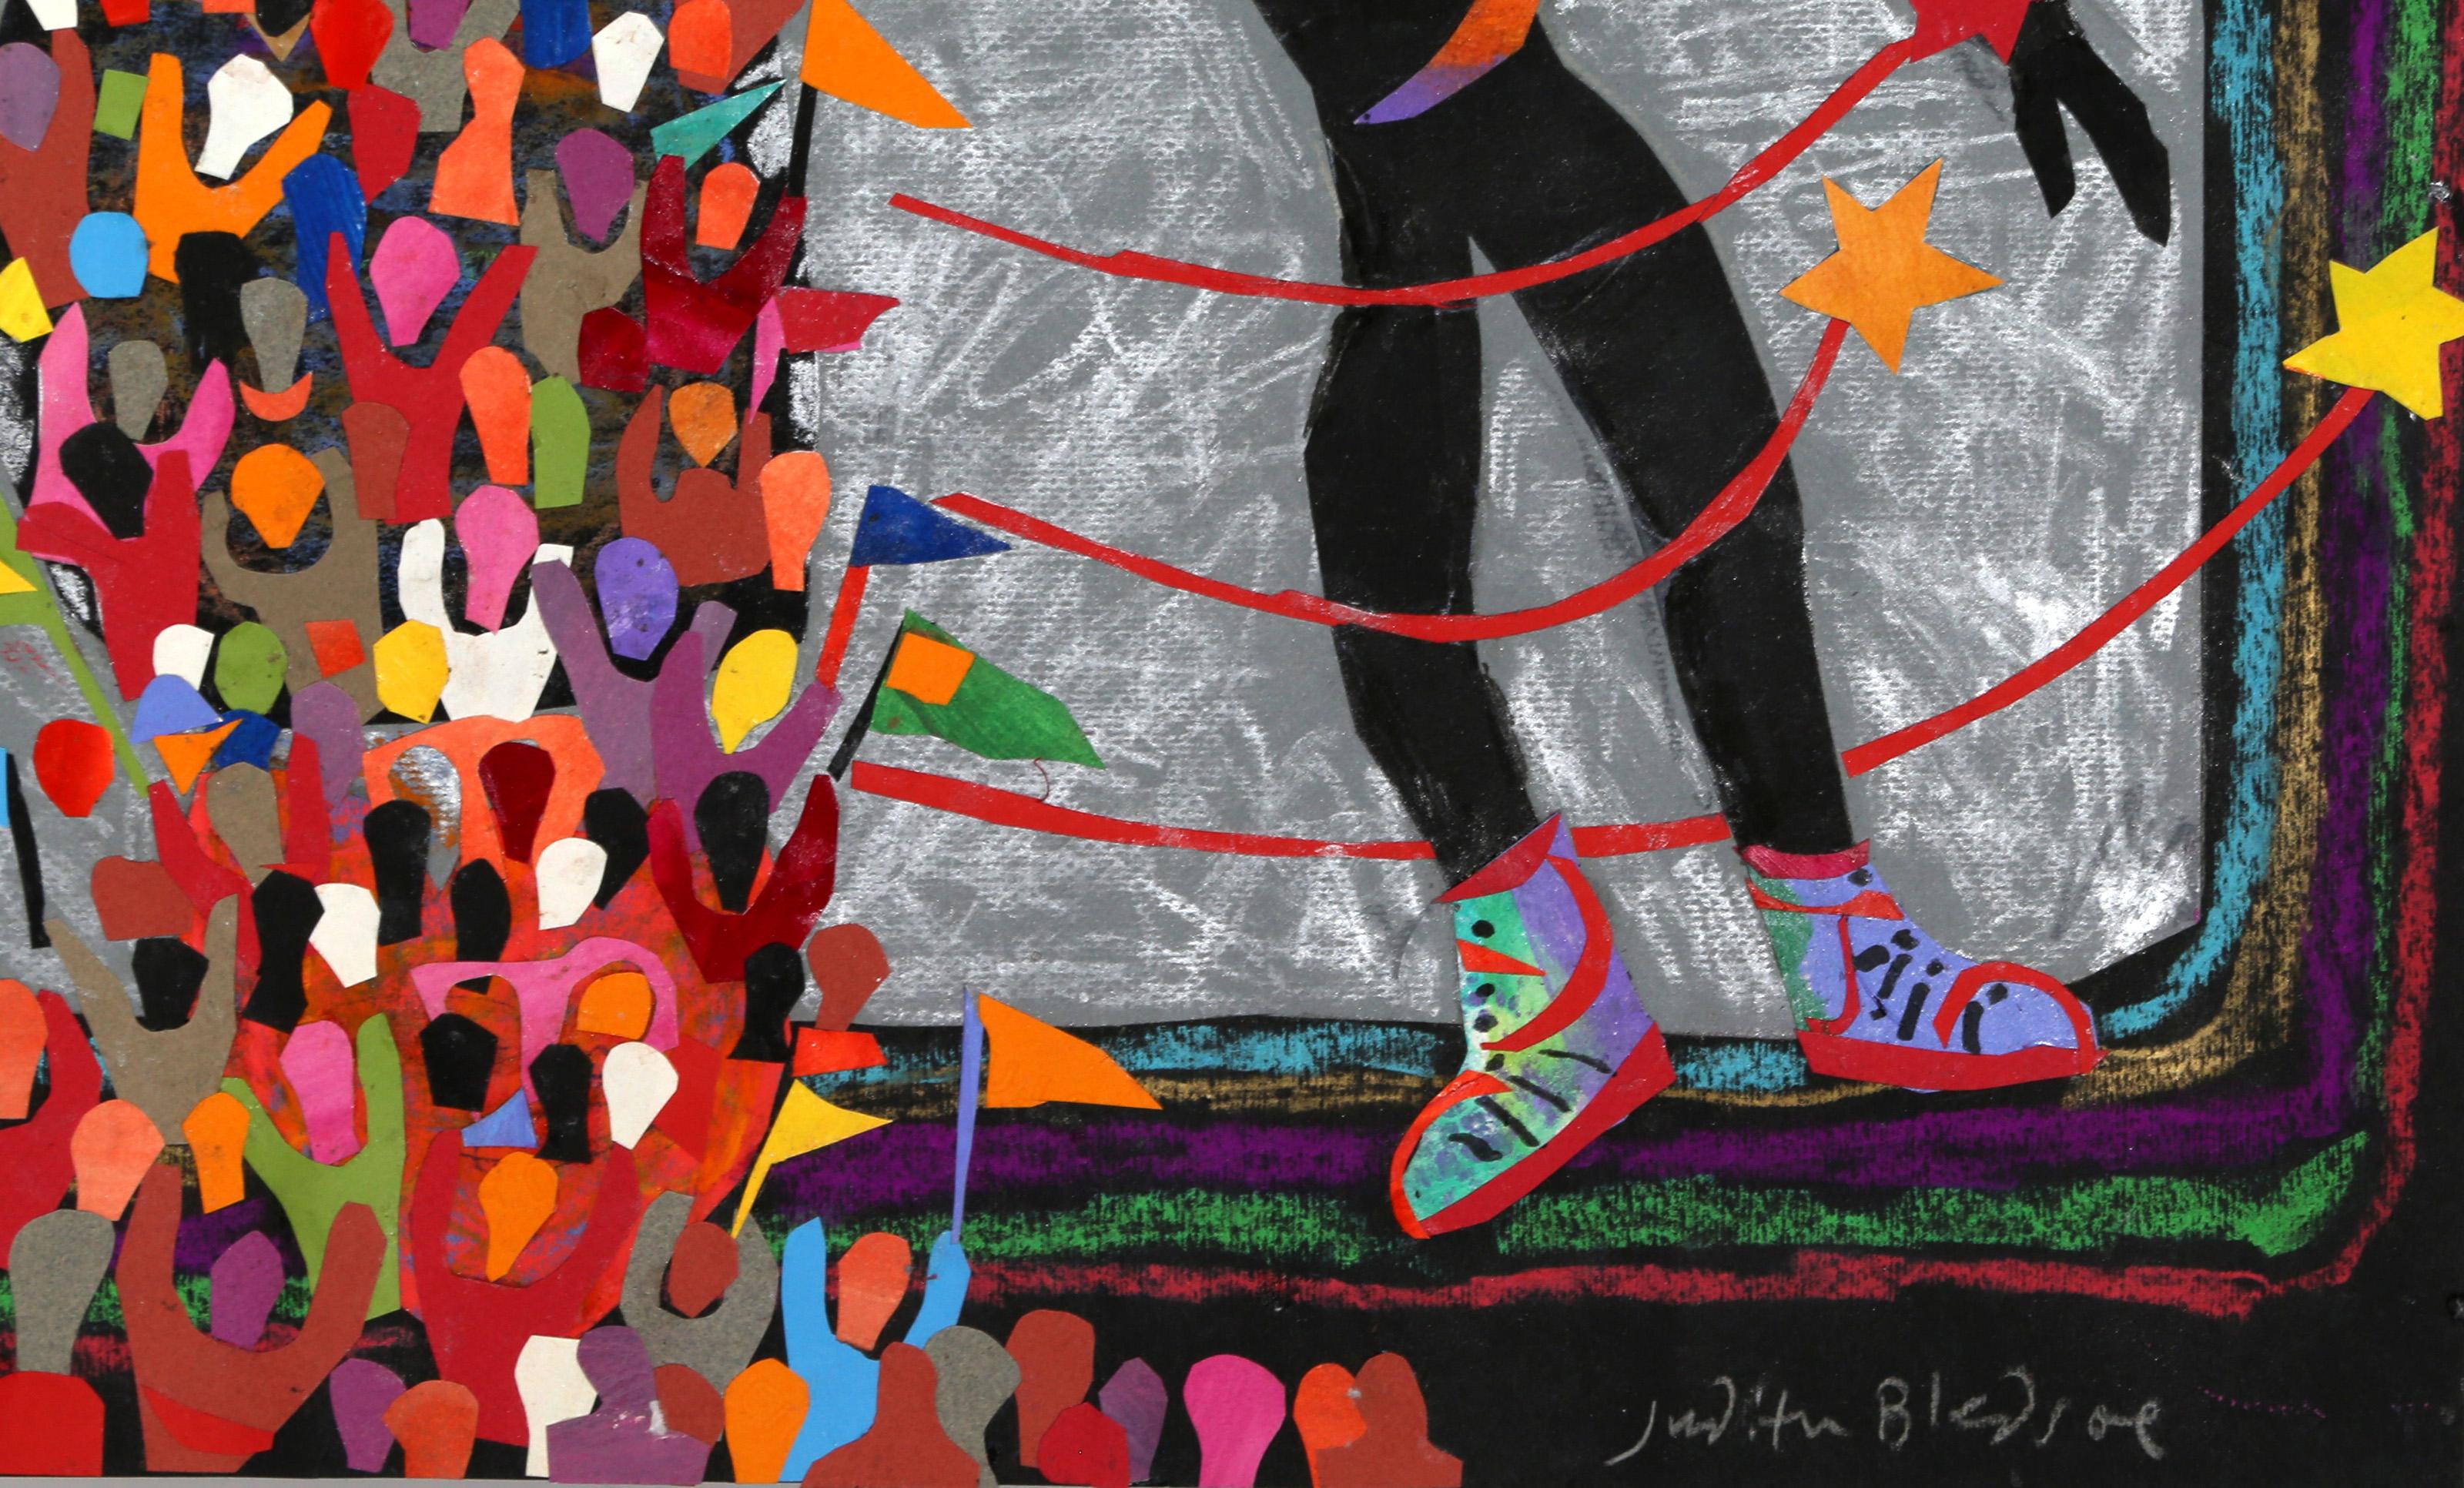 Atlanta Olympics - Athlete with Ball, Pastel and Collage on Paper - Folk Art Art by Judith Bledsoe